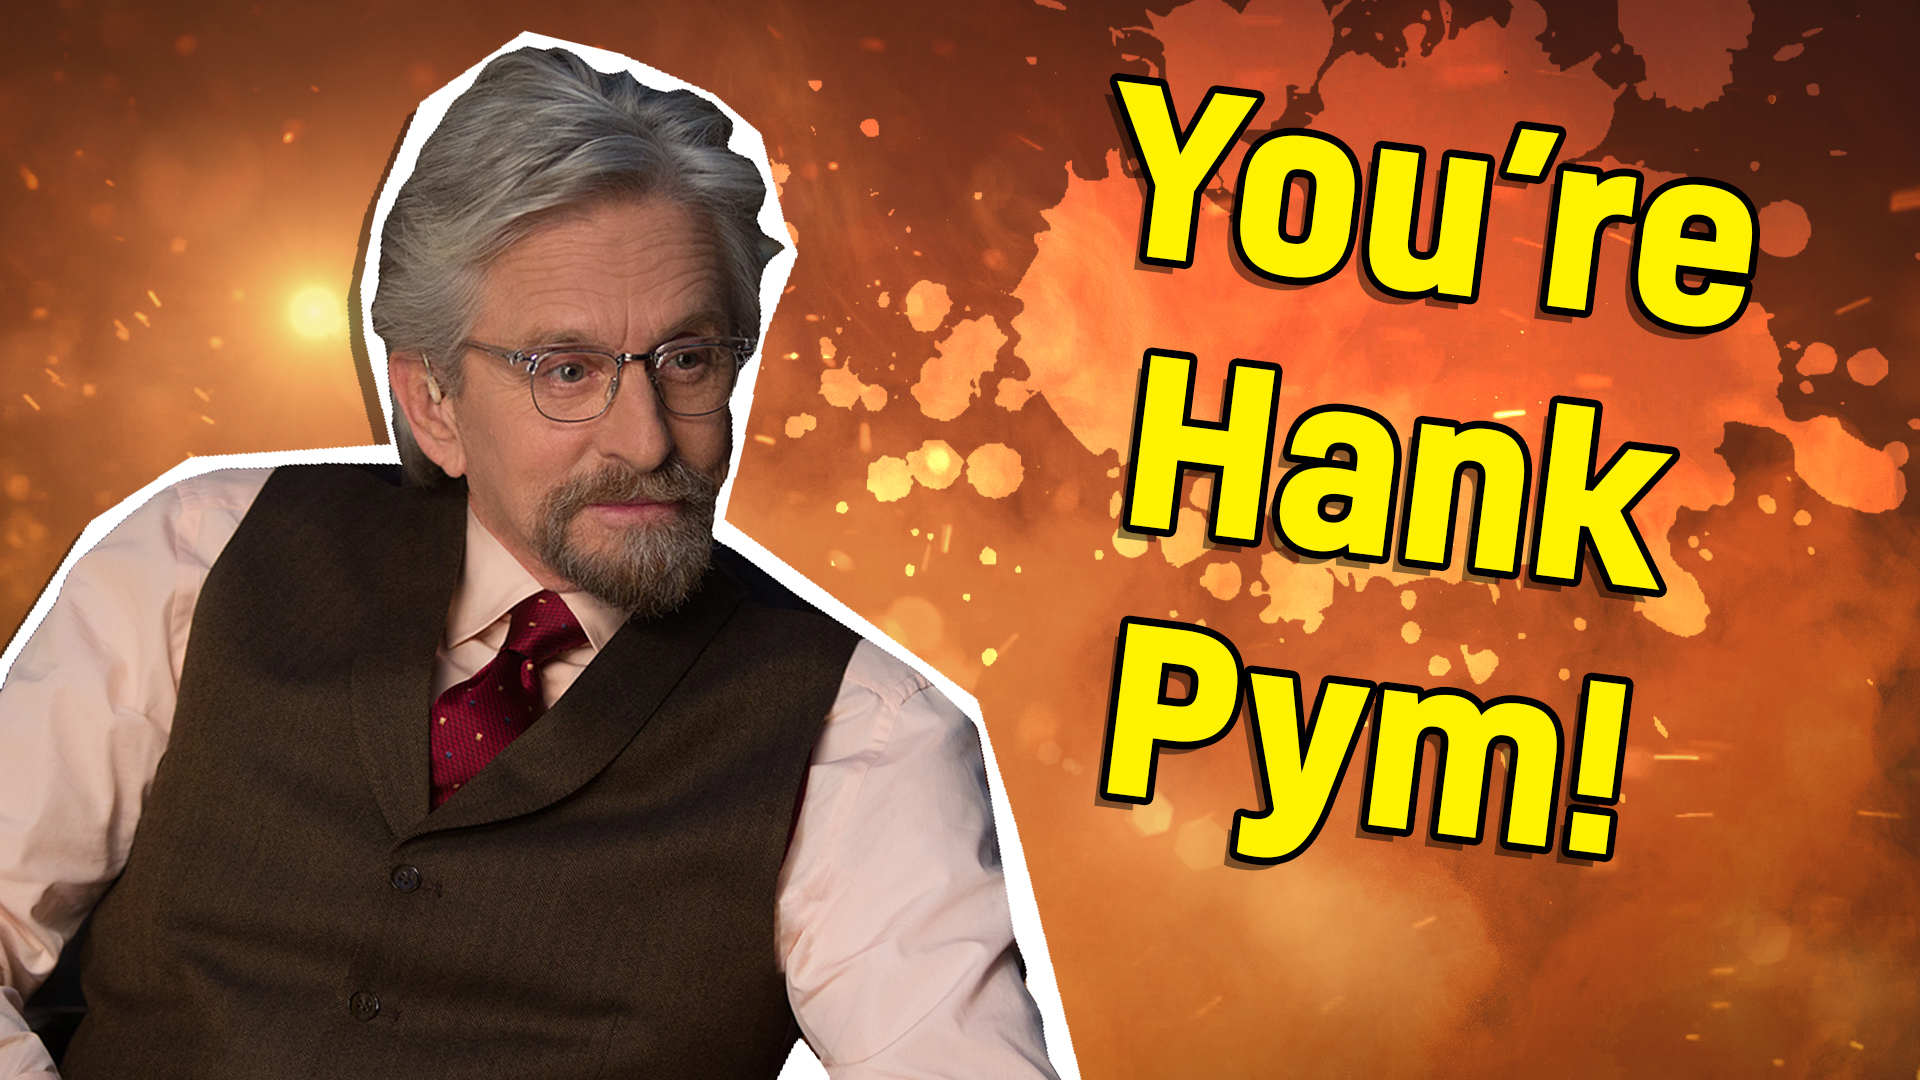 Result: You’re Hank Pym!